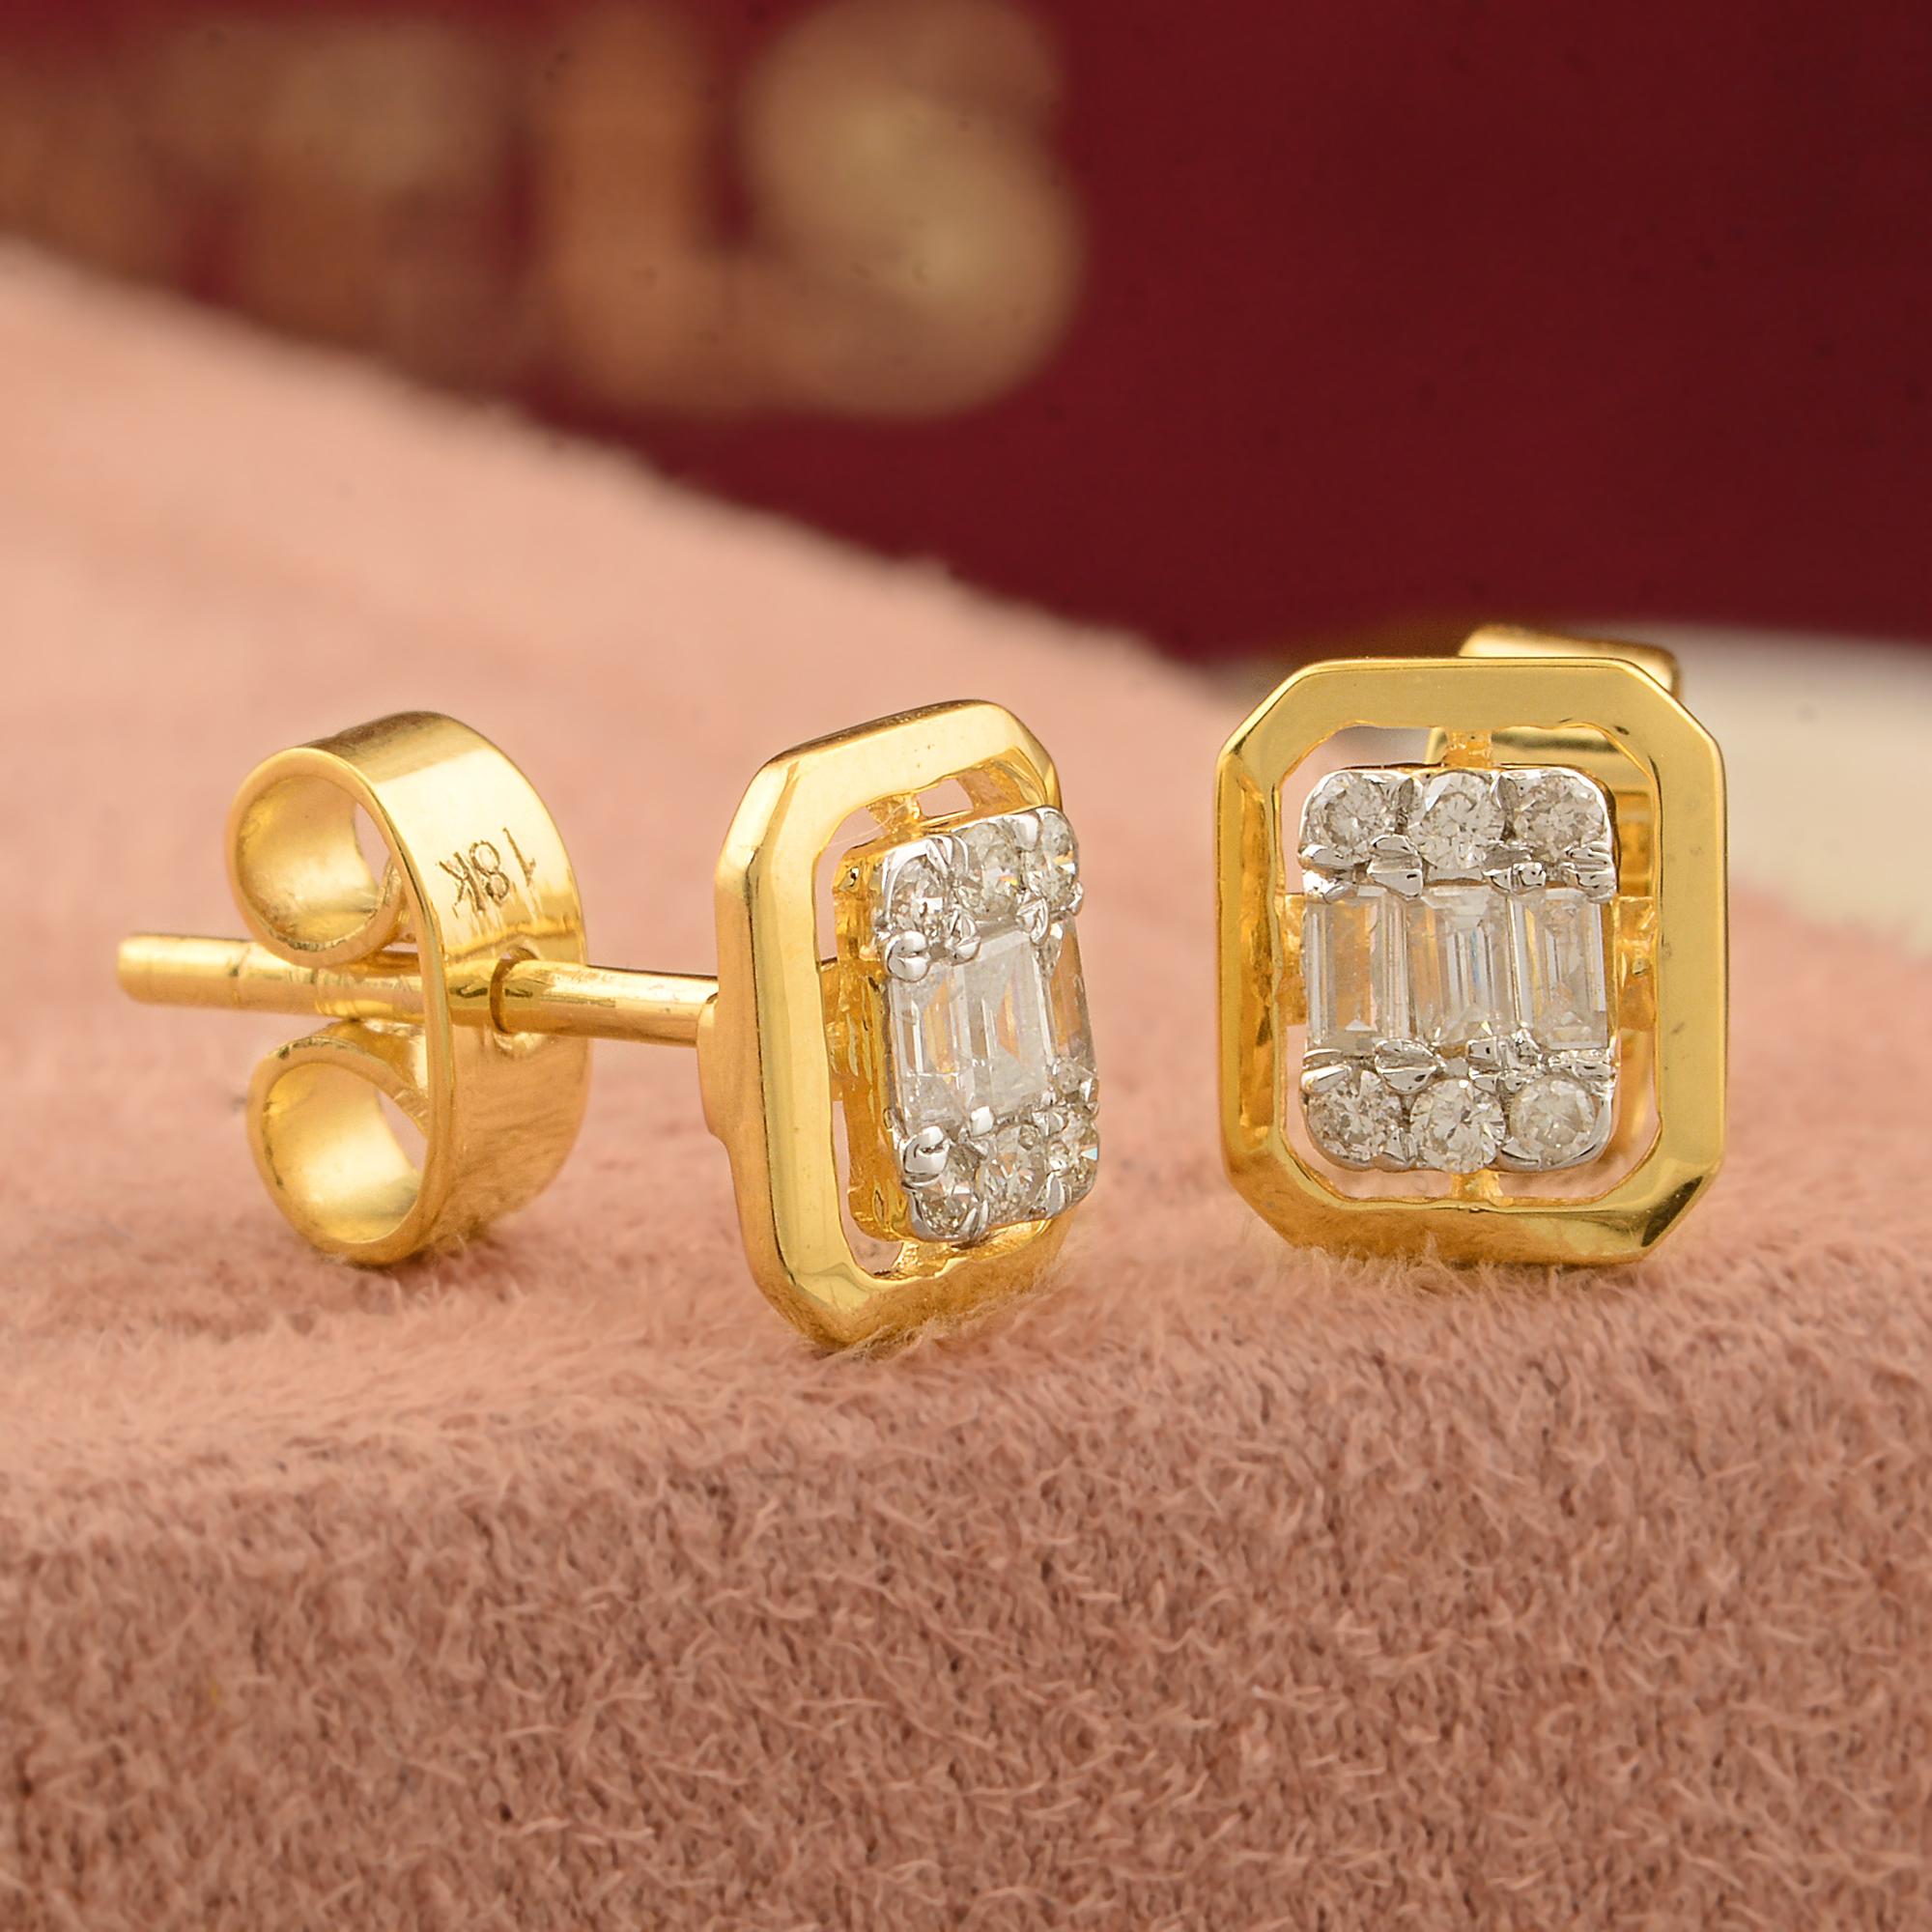 Modern Natural 0.21 Carat Baguette Diamond Stud Earrings Solid 18k Yellow Gold Jewelry For Sale